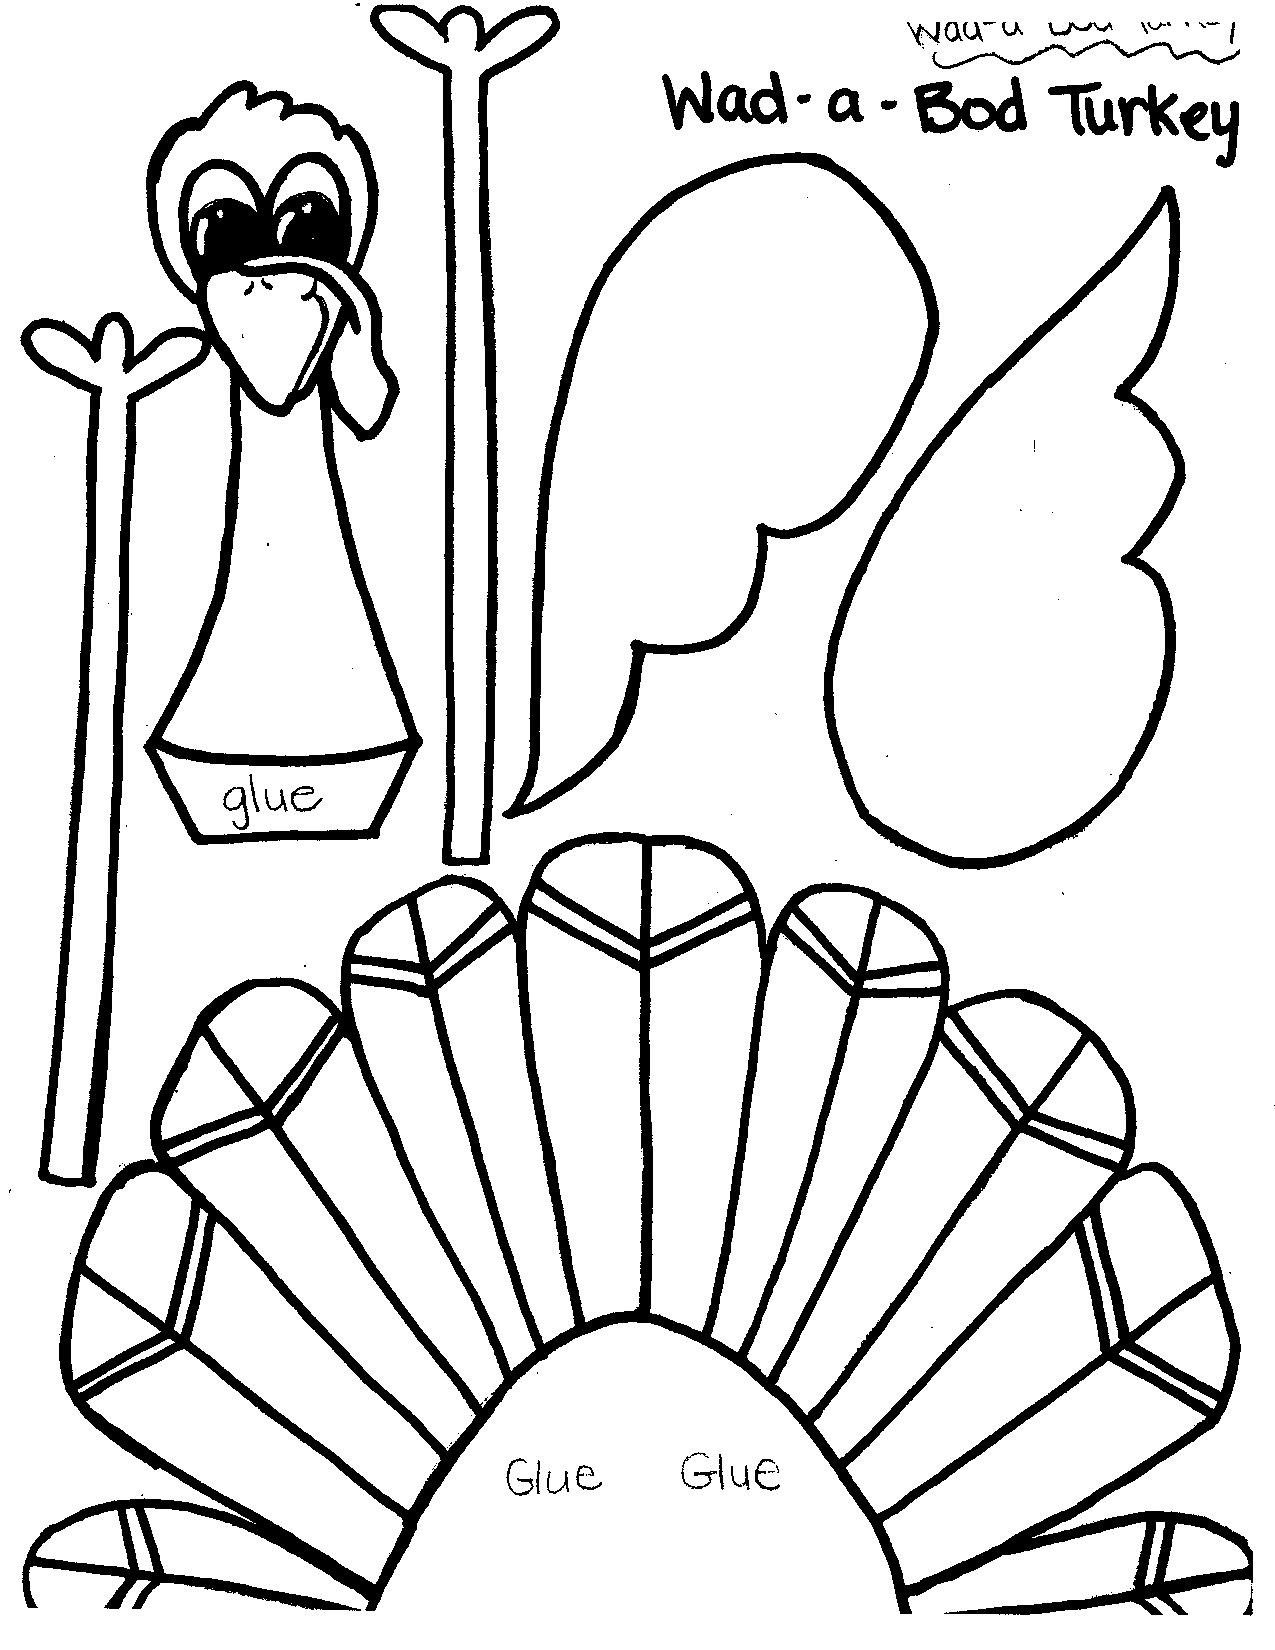 Thanksgiving Turkey Cut Out
 Printable Thanksgiving Crafts and Activities for Kids